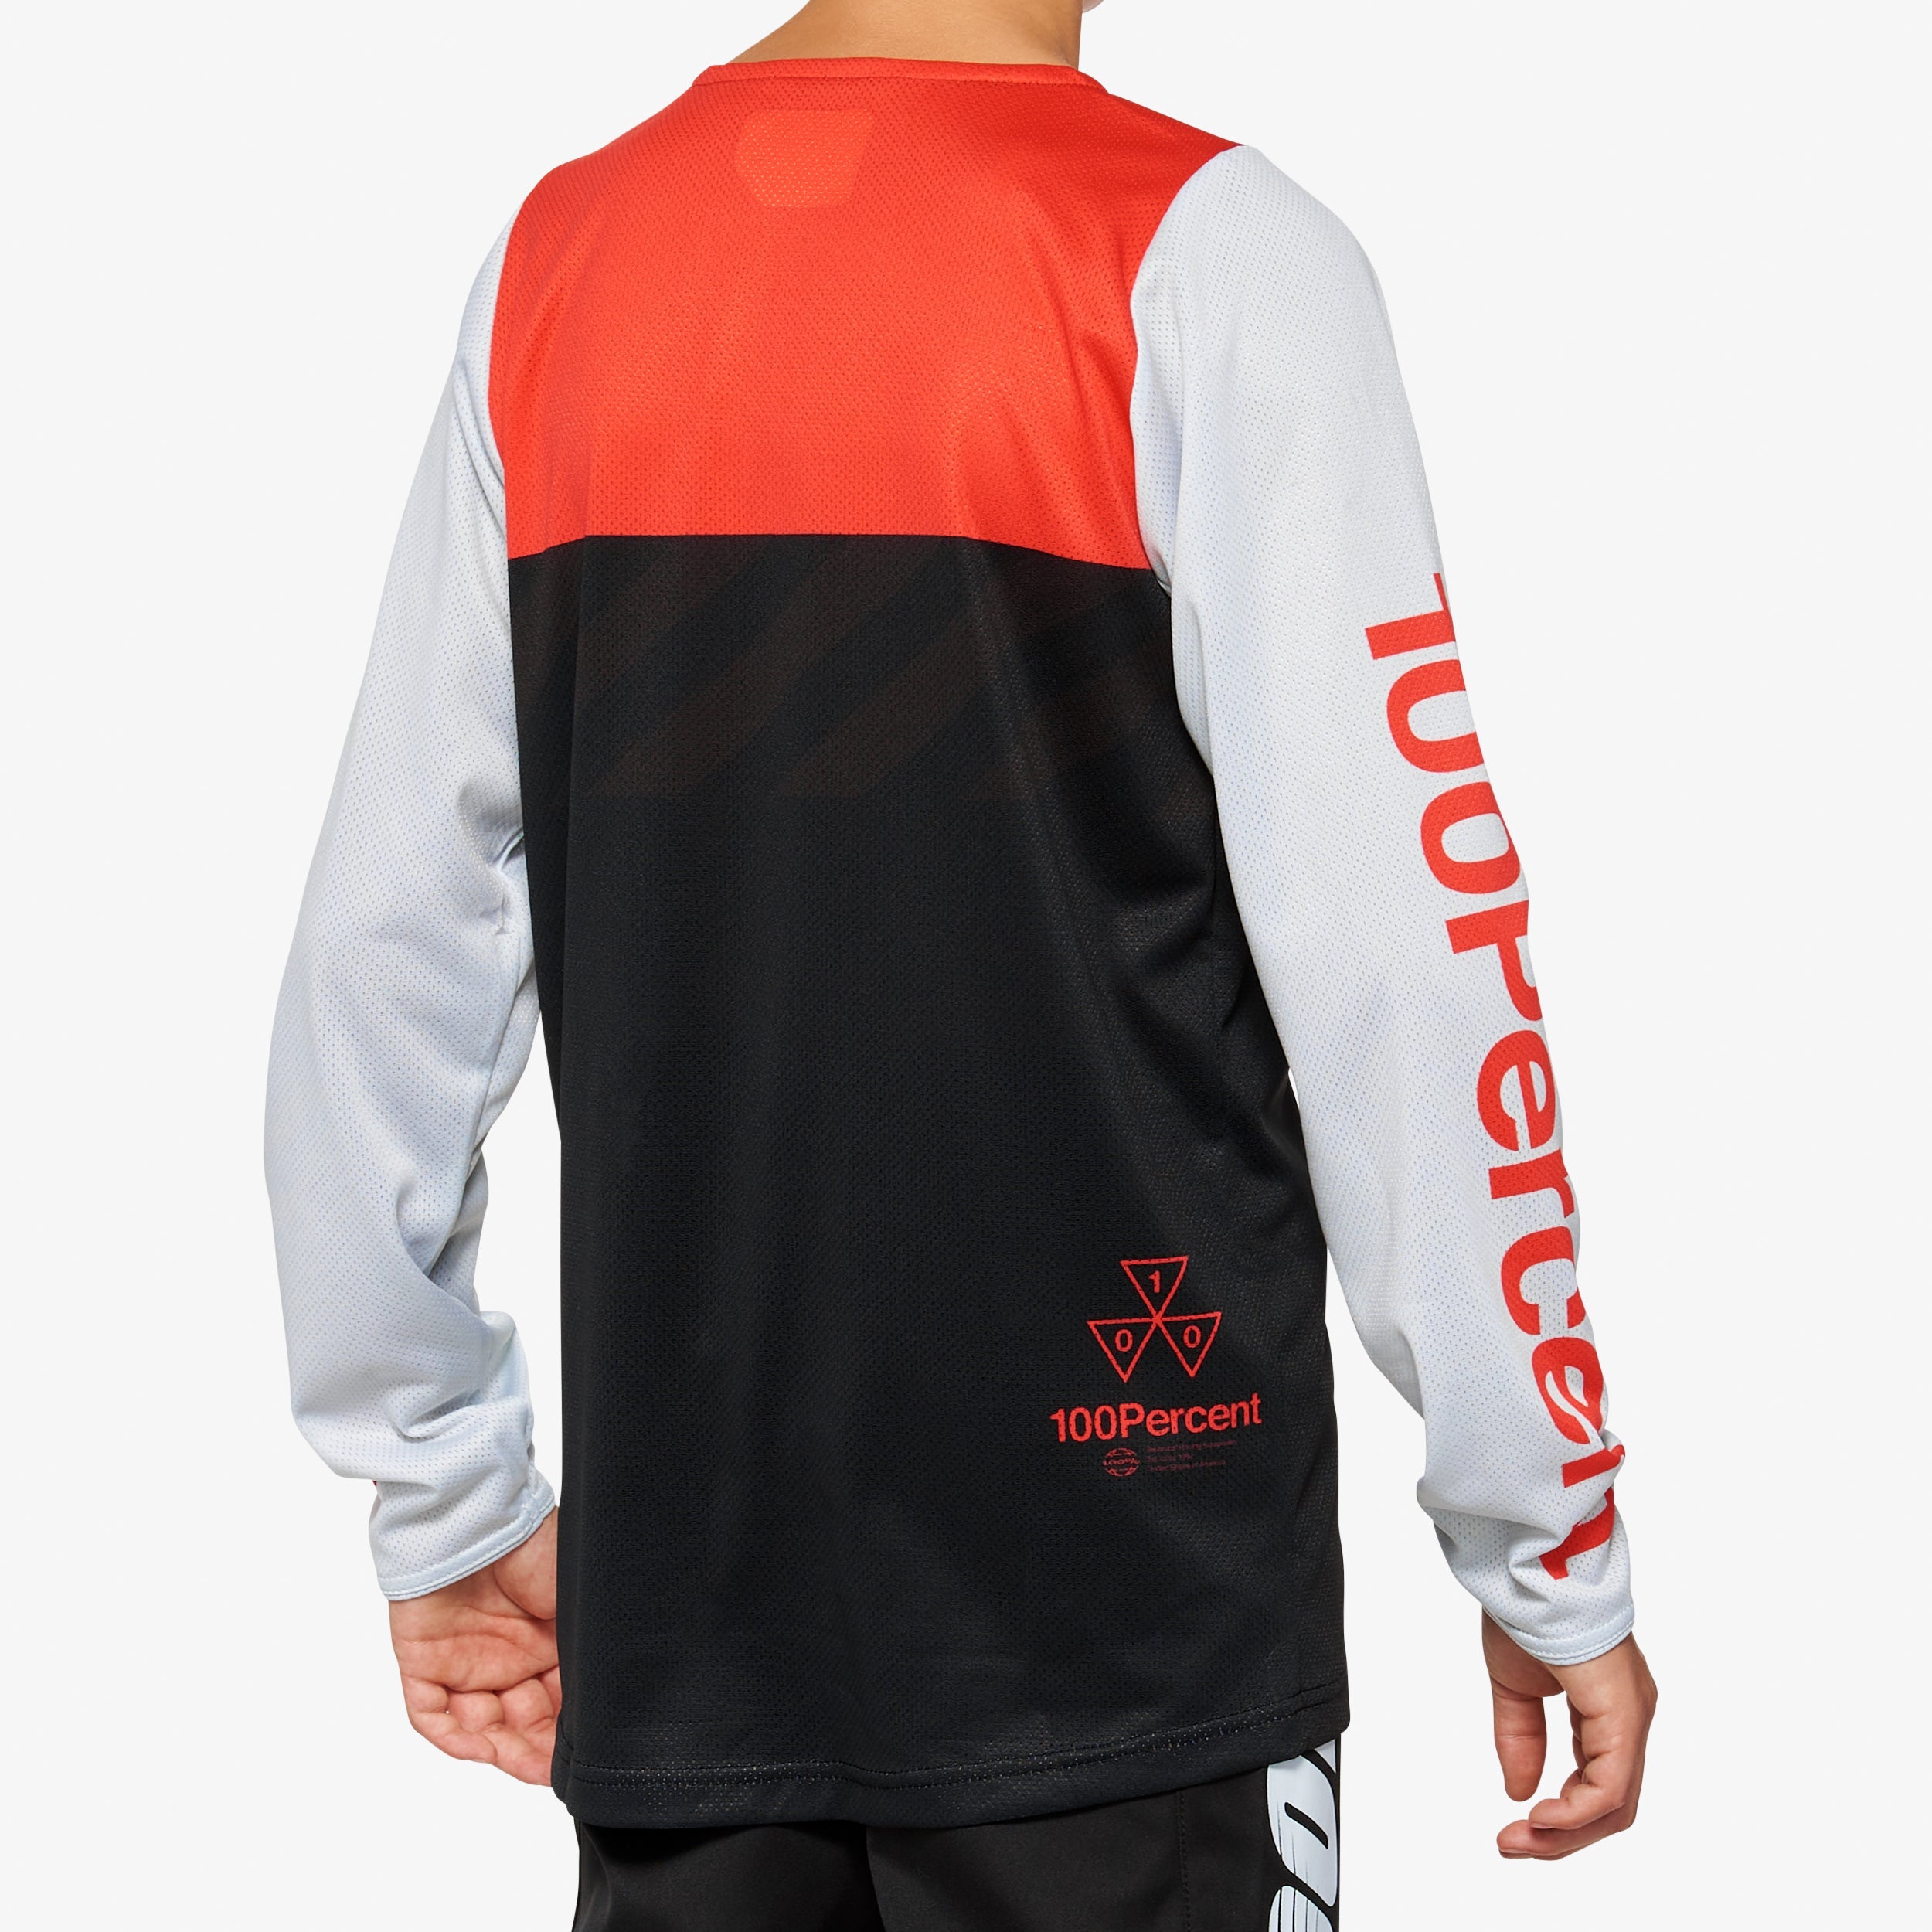 R-CORE Youth Long Sleeve Jersey Black/Racer Red - Secondary